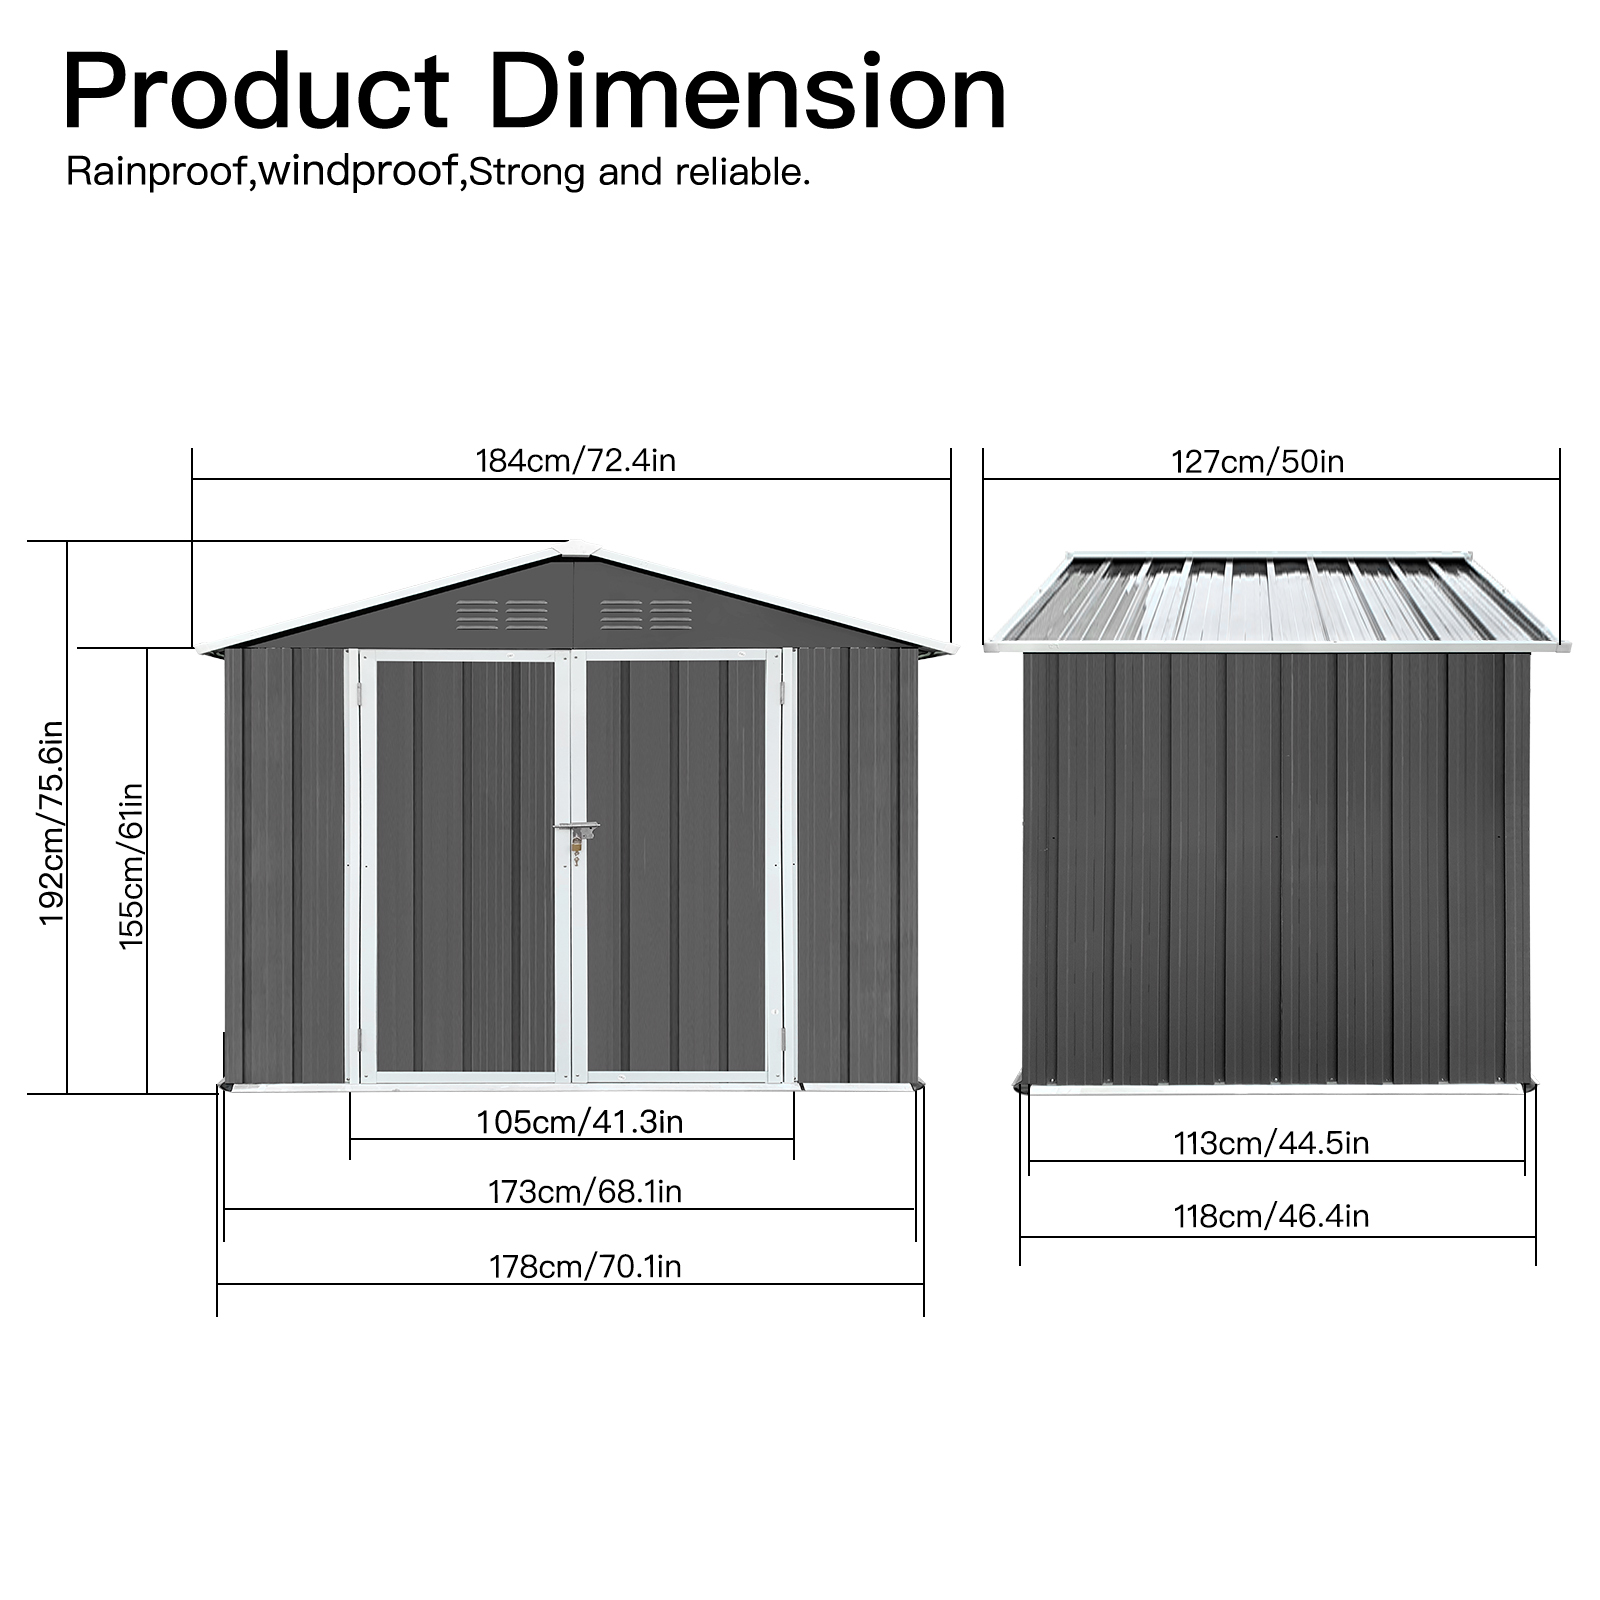 6' x 4' Outdoor Metal Storage Shed, Tools Storage Shed, Galvanized Steel Garden Shed with Lockable Doors, Outdoor Storage Shed for Backyard, Patio, Lawn, D8311 - image 5 of 9